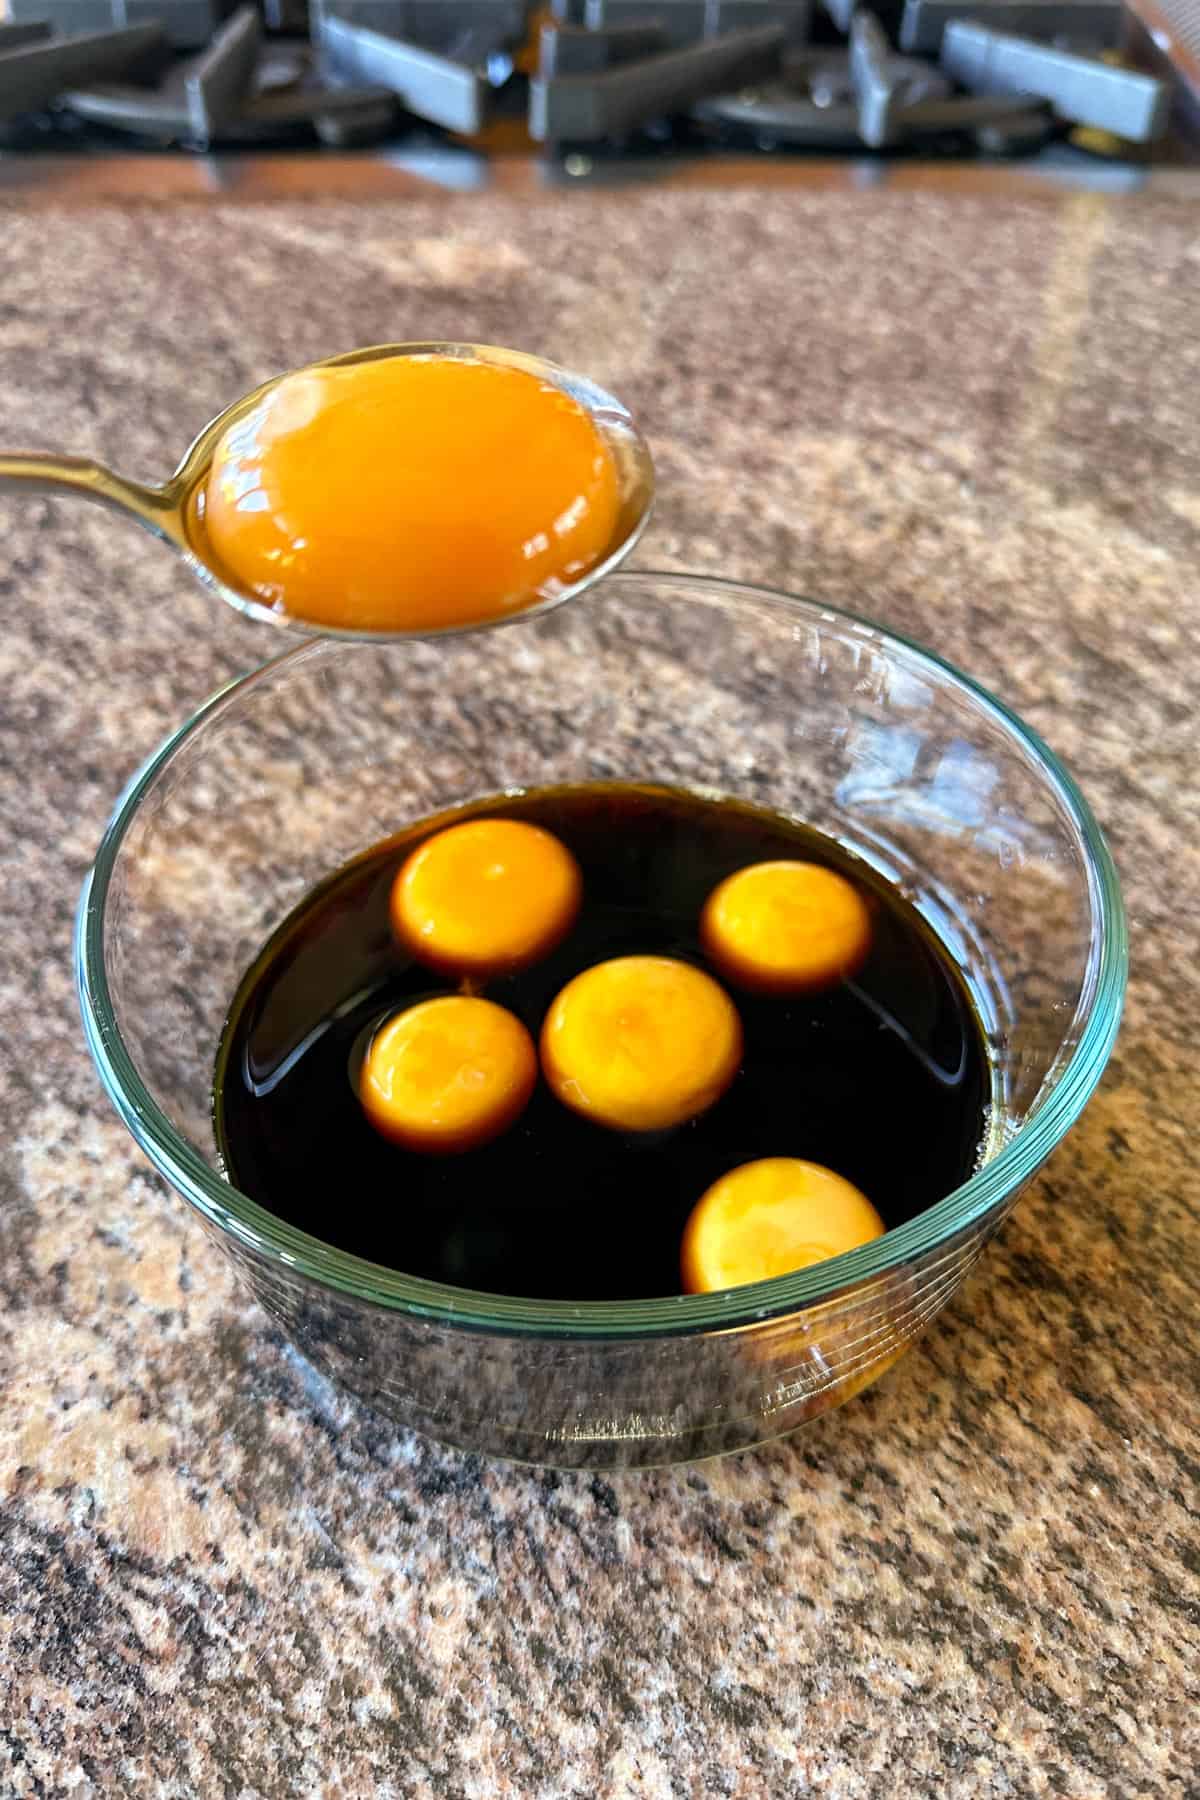 Placing eggs in the marinade for Soy Cured Egg Yolks.